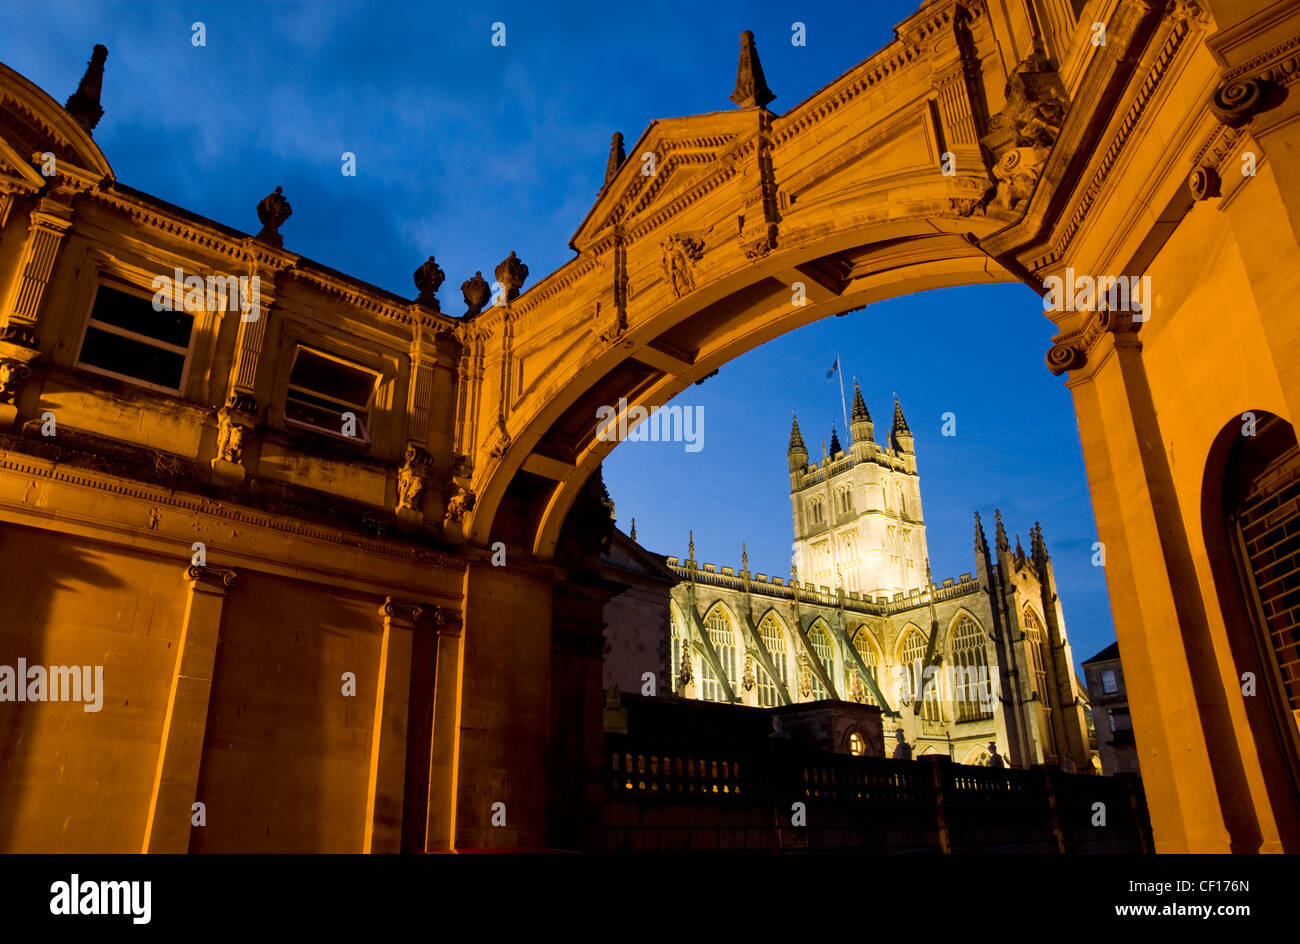 A view of Bath Abbey at dusk framed by an archway Stock Photo